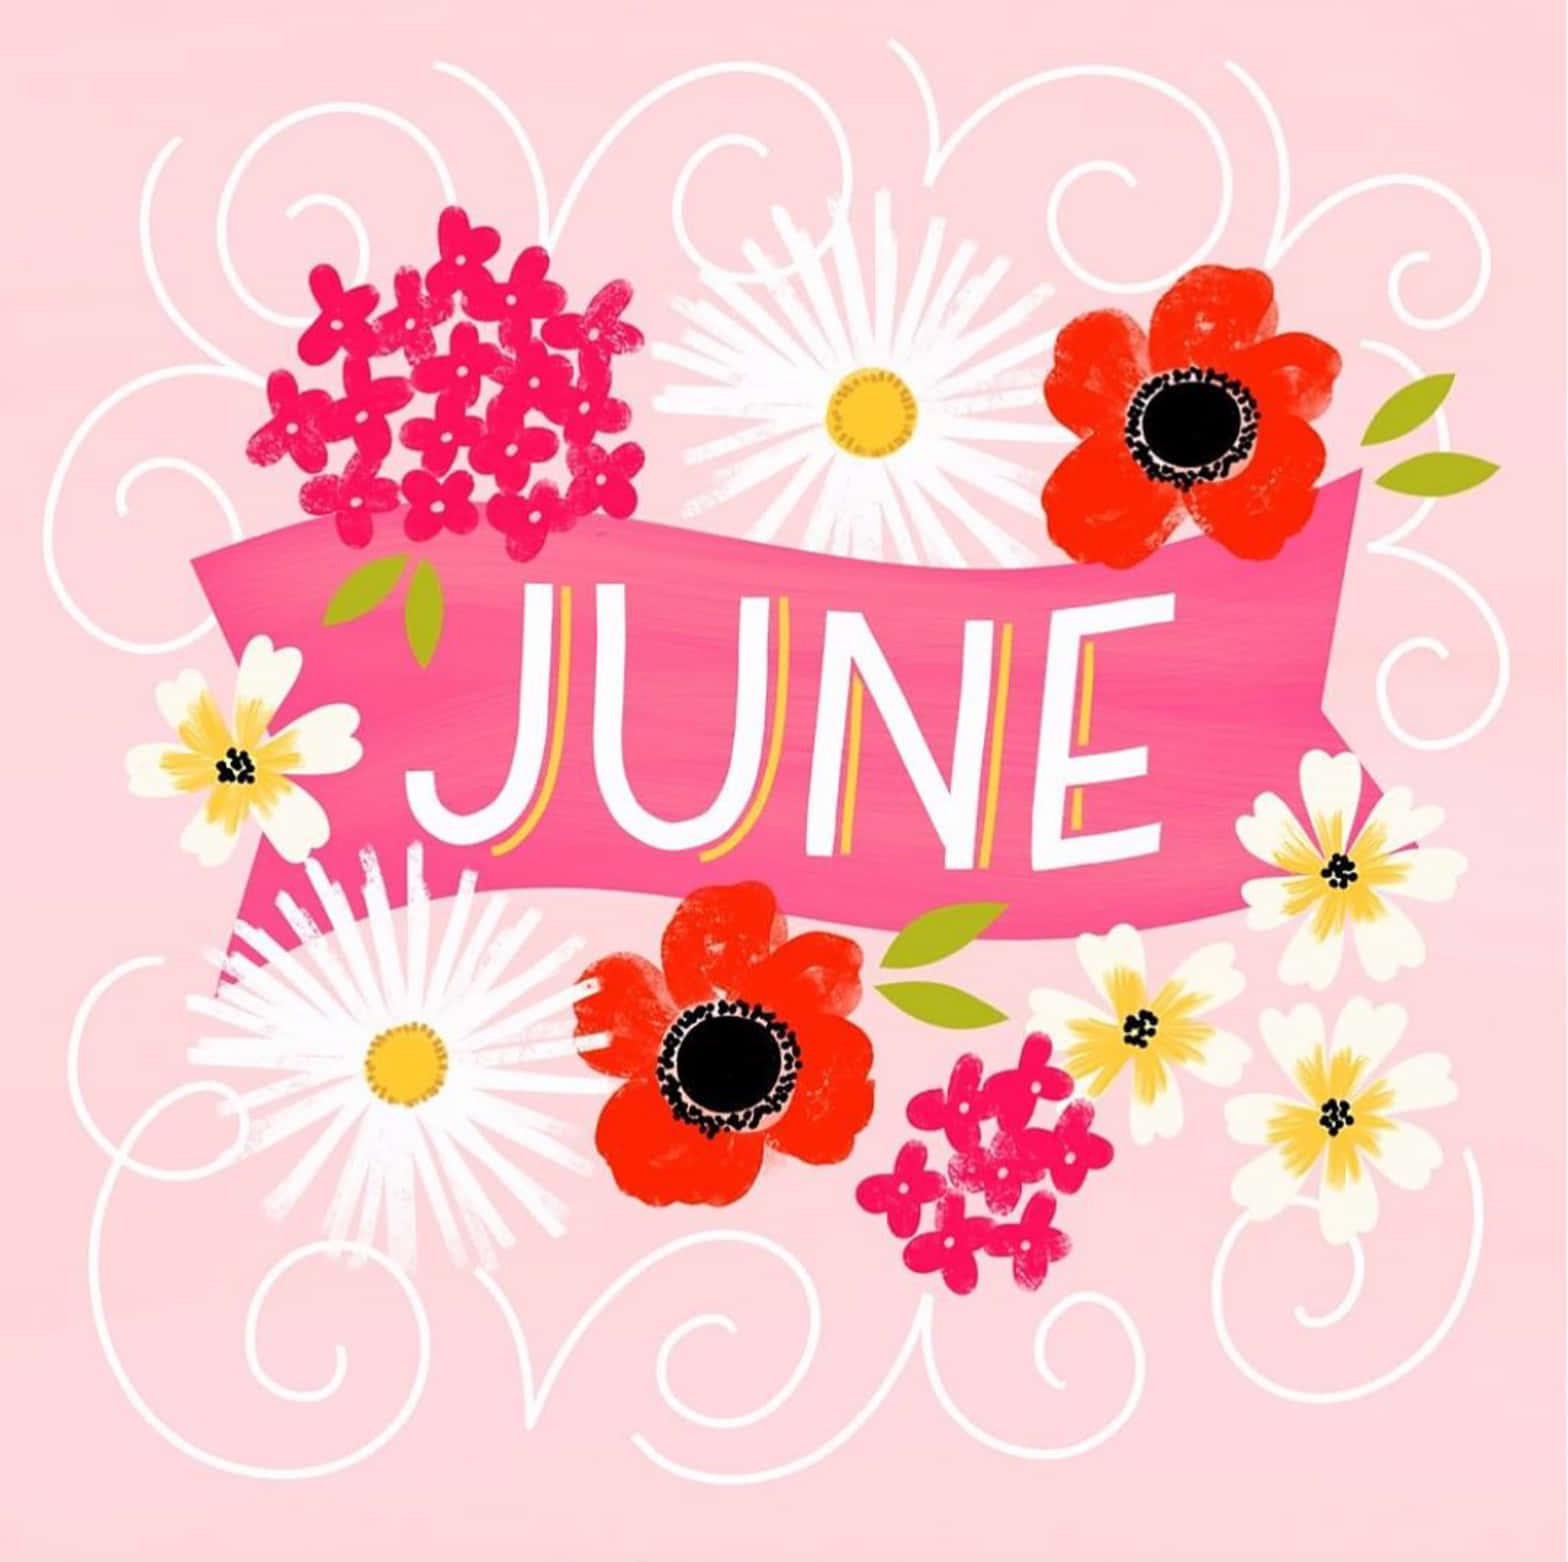 June Greeting Card With Flowers And Ribbon Wallpaper